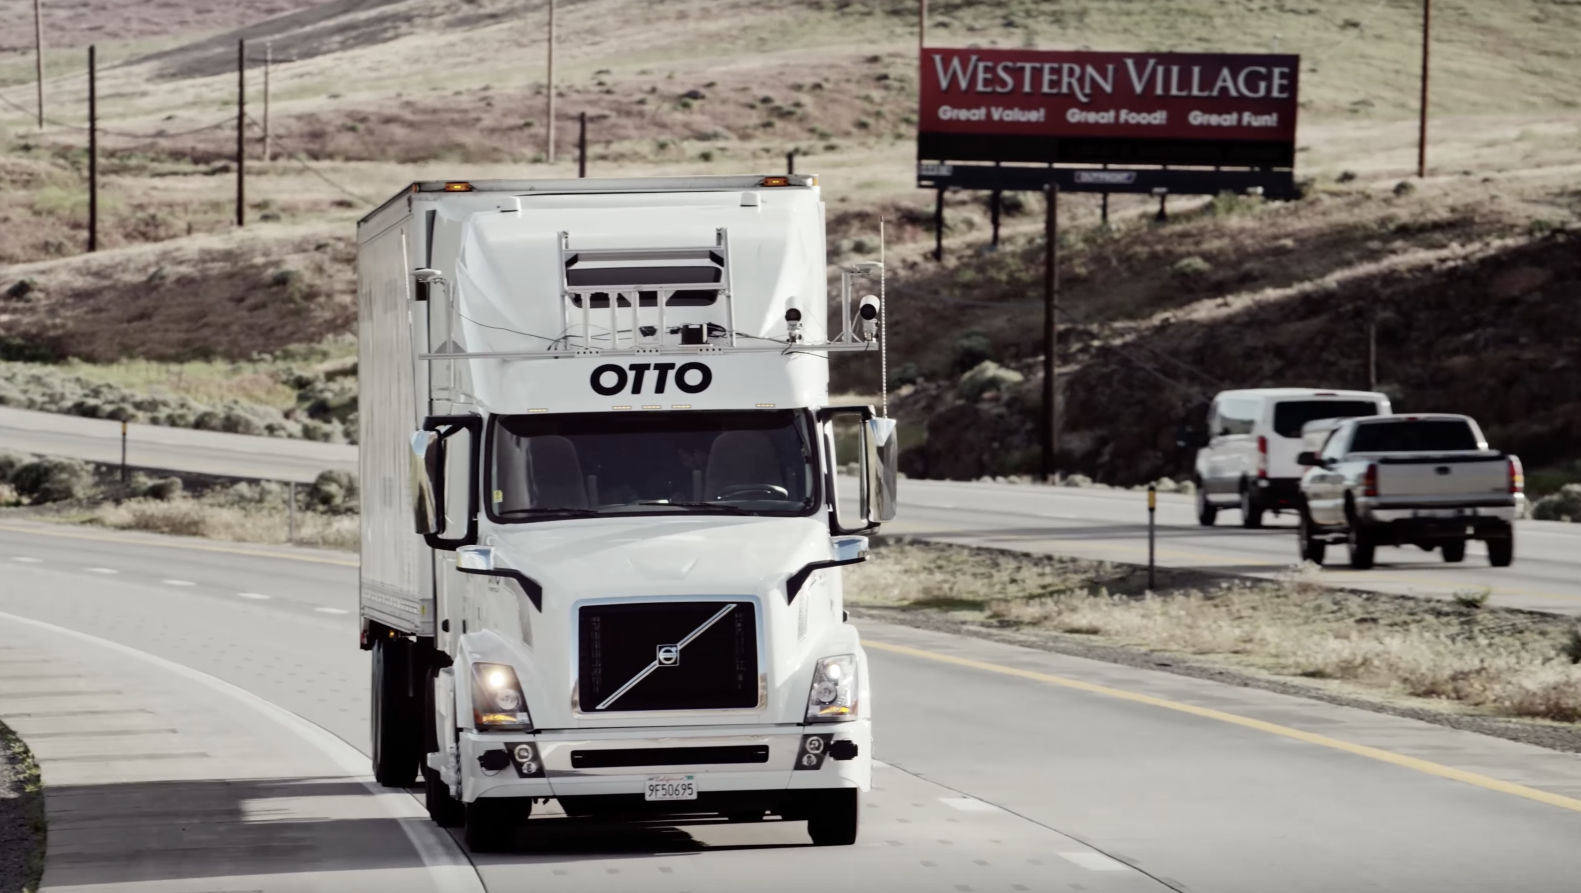 uber beer self-driving truck otto